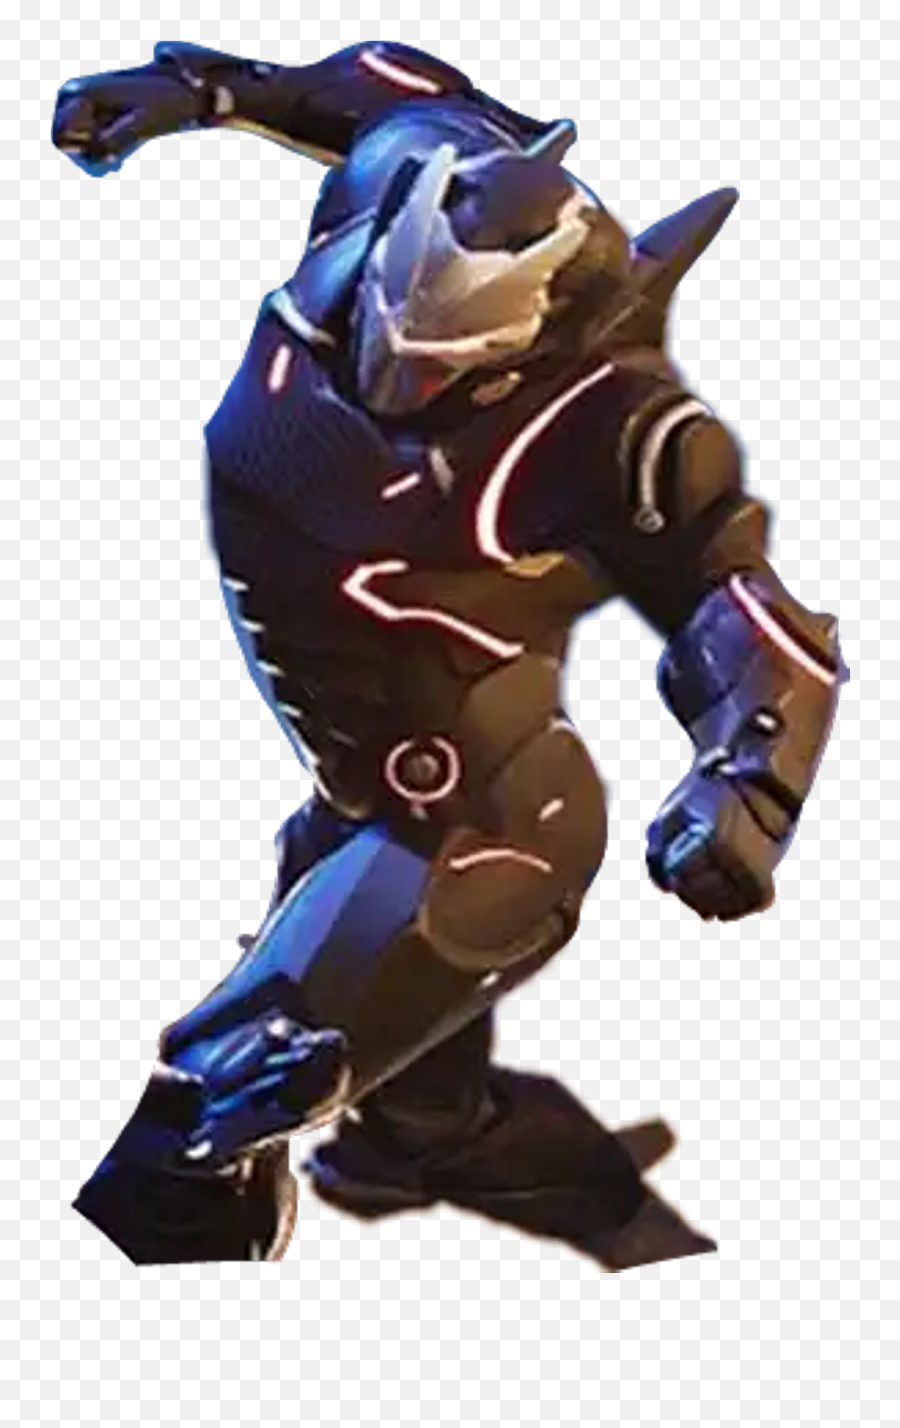 Fortnite Omega Background Posted By Zoey Mercado - Fortnite Omega Png Transparent,Fortnite Background Png